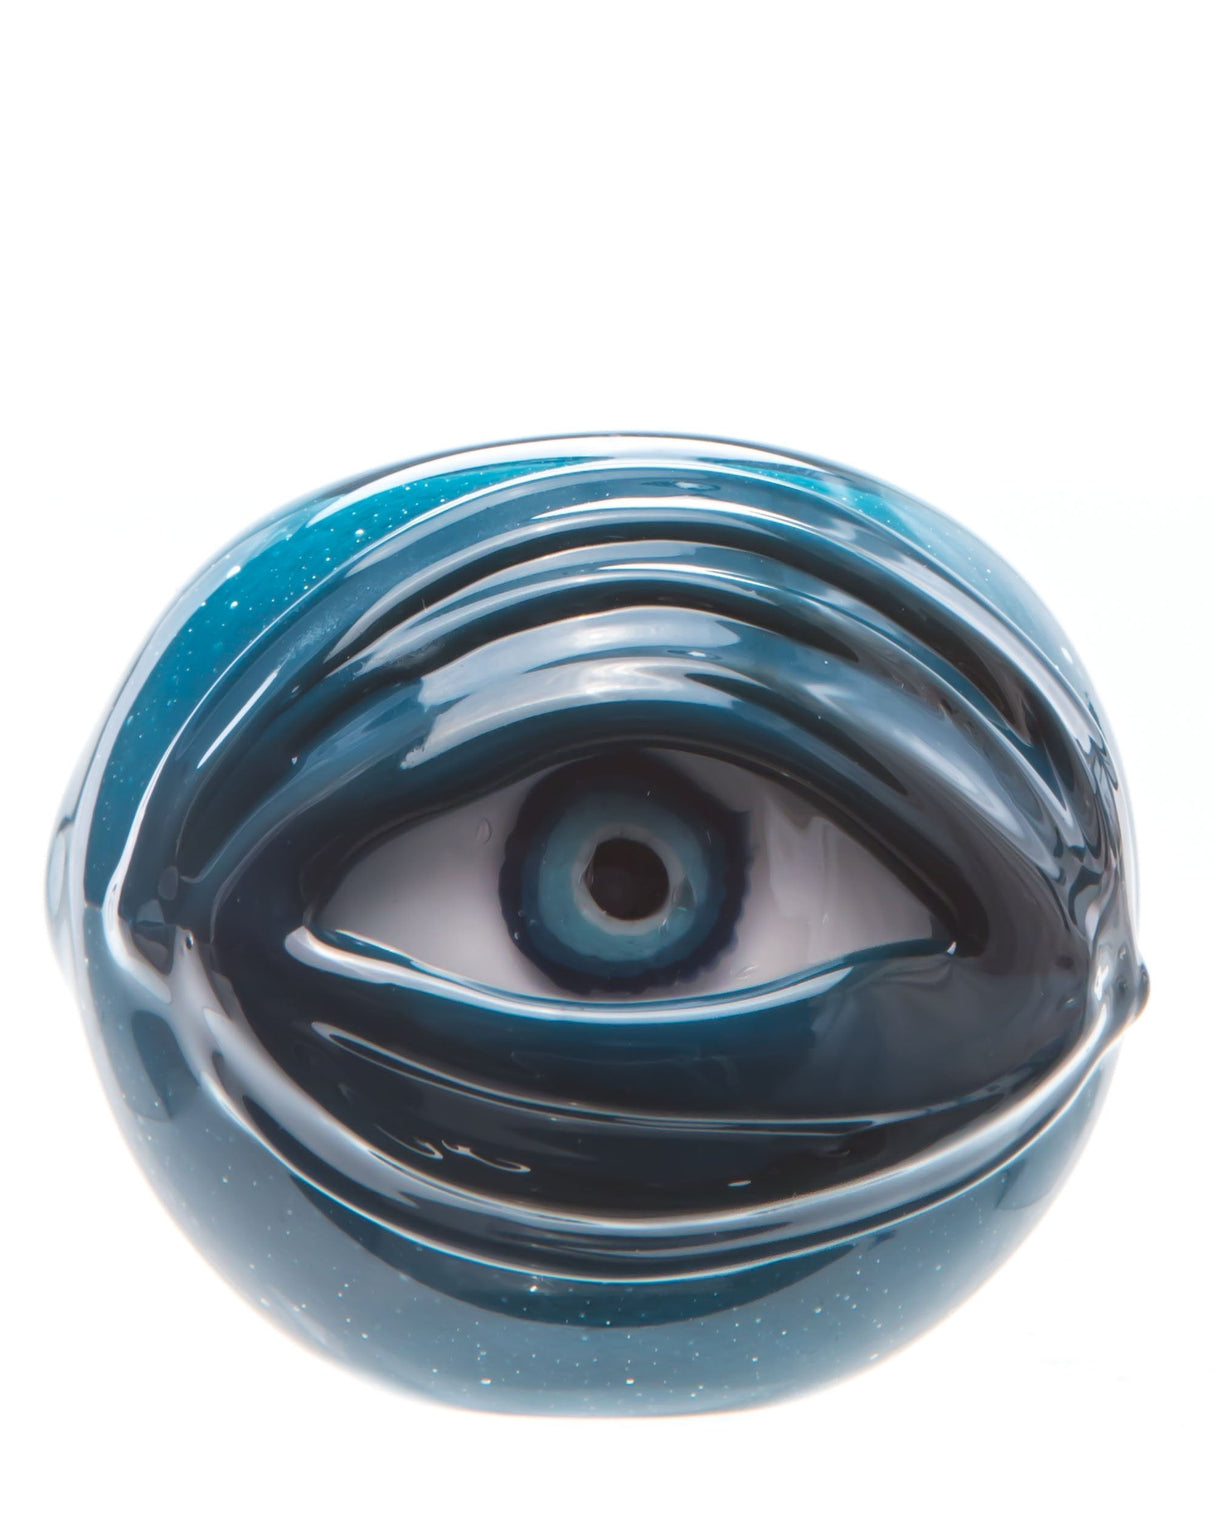 Chameleon Glass Teal Cyclops Pipe, Borosilicate Glass, Top View